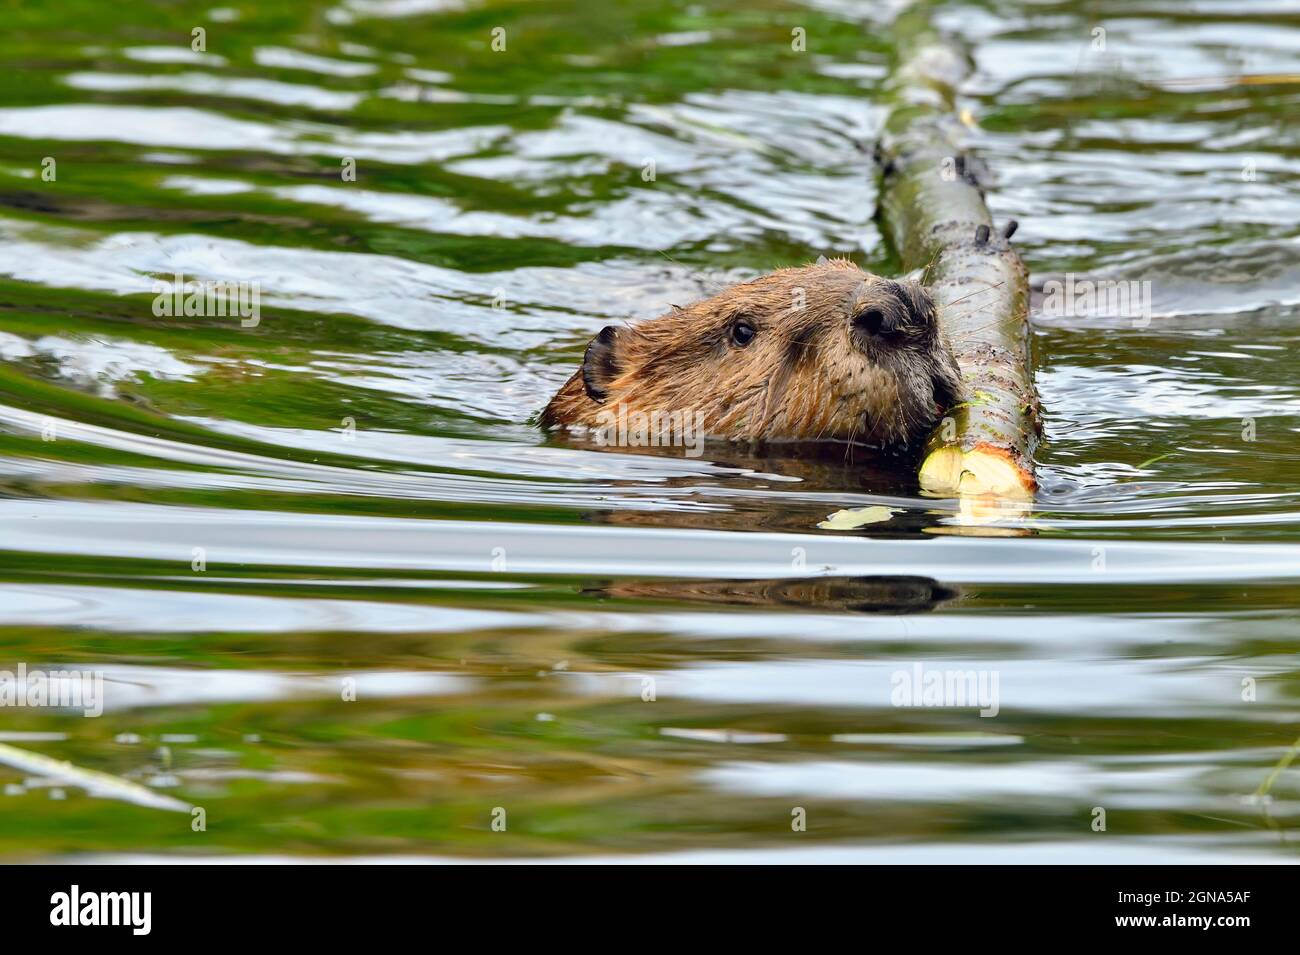 A close up front view of an adult beaver 'Castor canadensis', hauling a fresh cut aspen tree to his food pile in his beaver pond in rural Alberta Cana Stock Photo